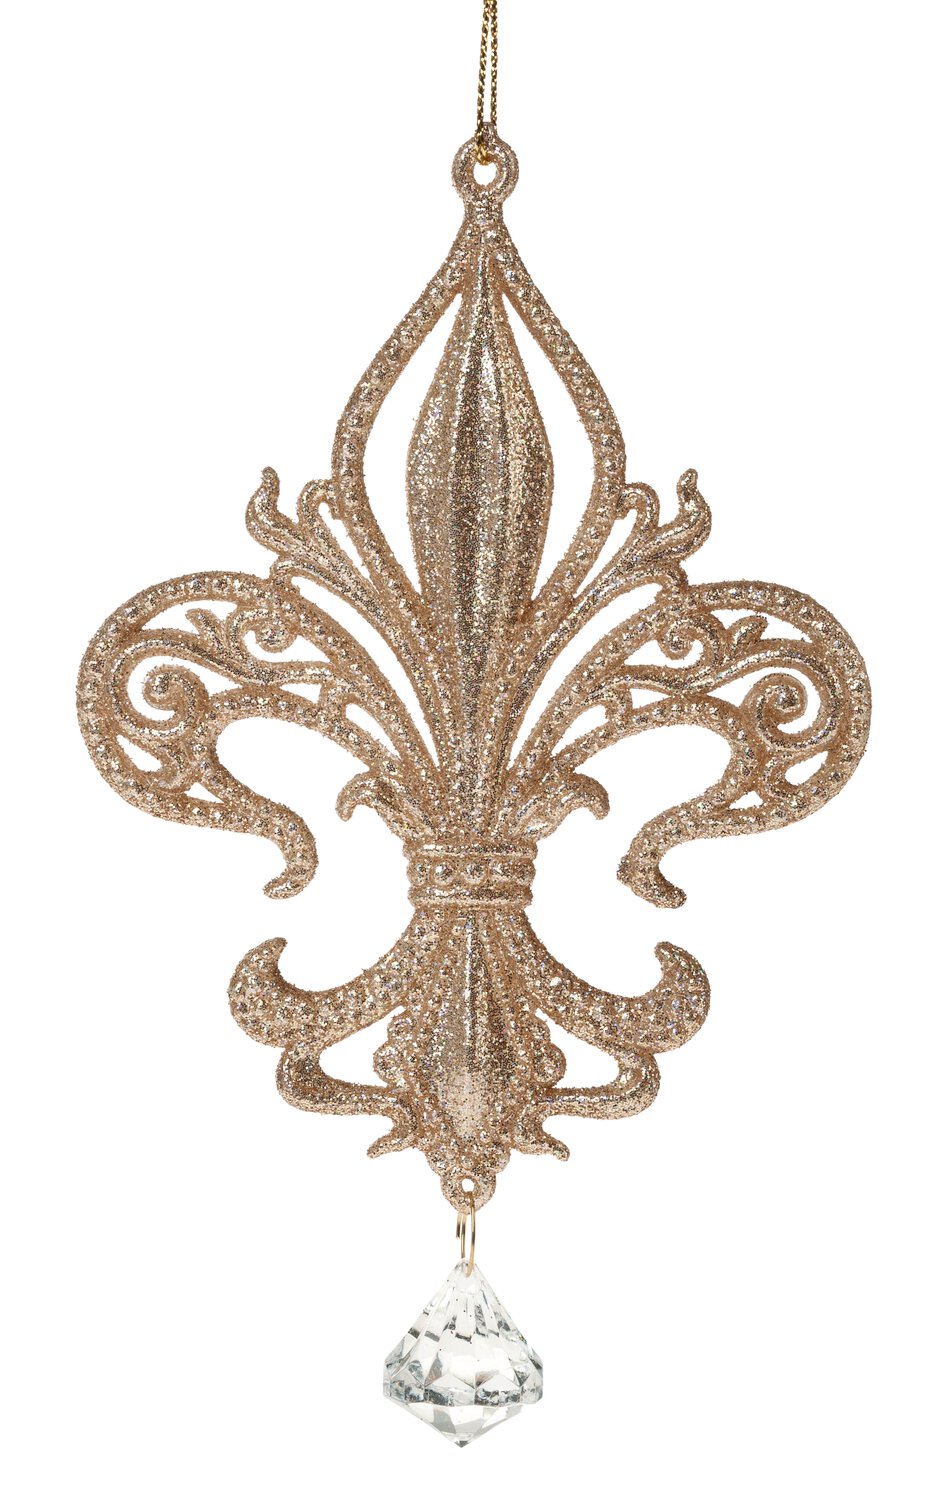 Deco ornament 'French lily' made of acrylic, 15 cm, thé-gold